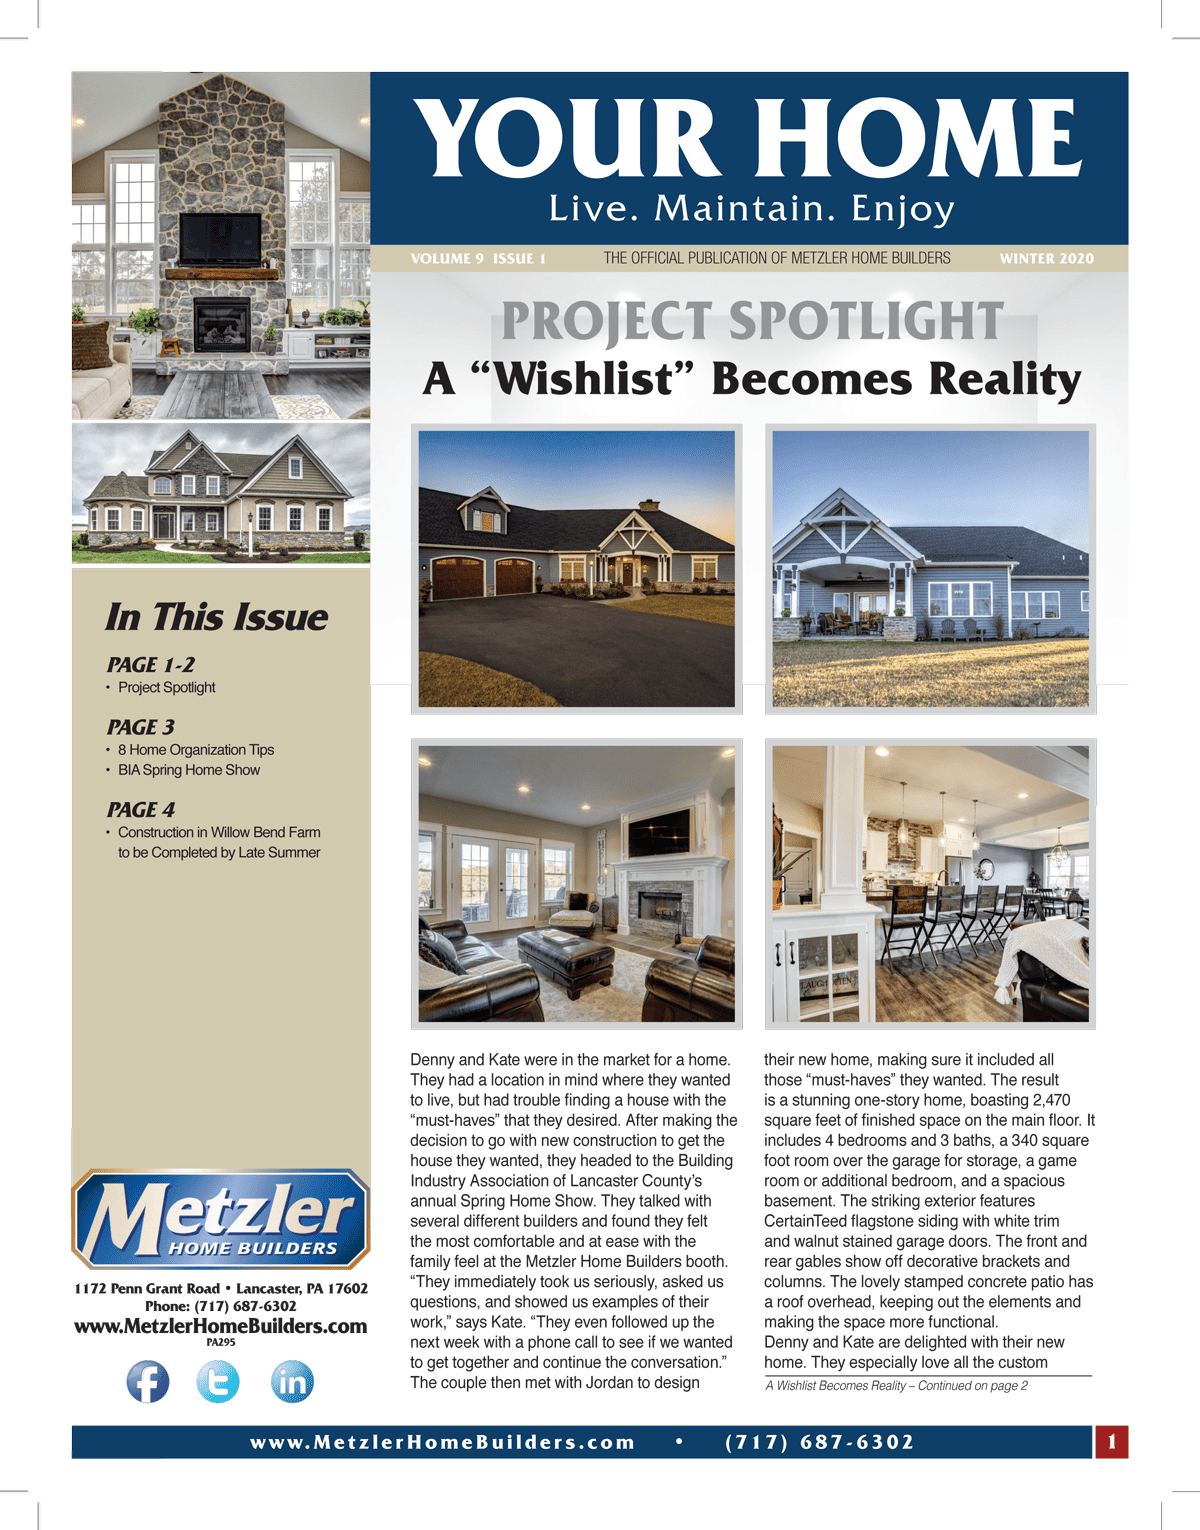 Metzler 'Your Home' Newsletter PDF cover for Volume 9 Issue 1